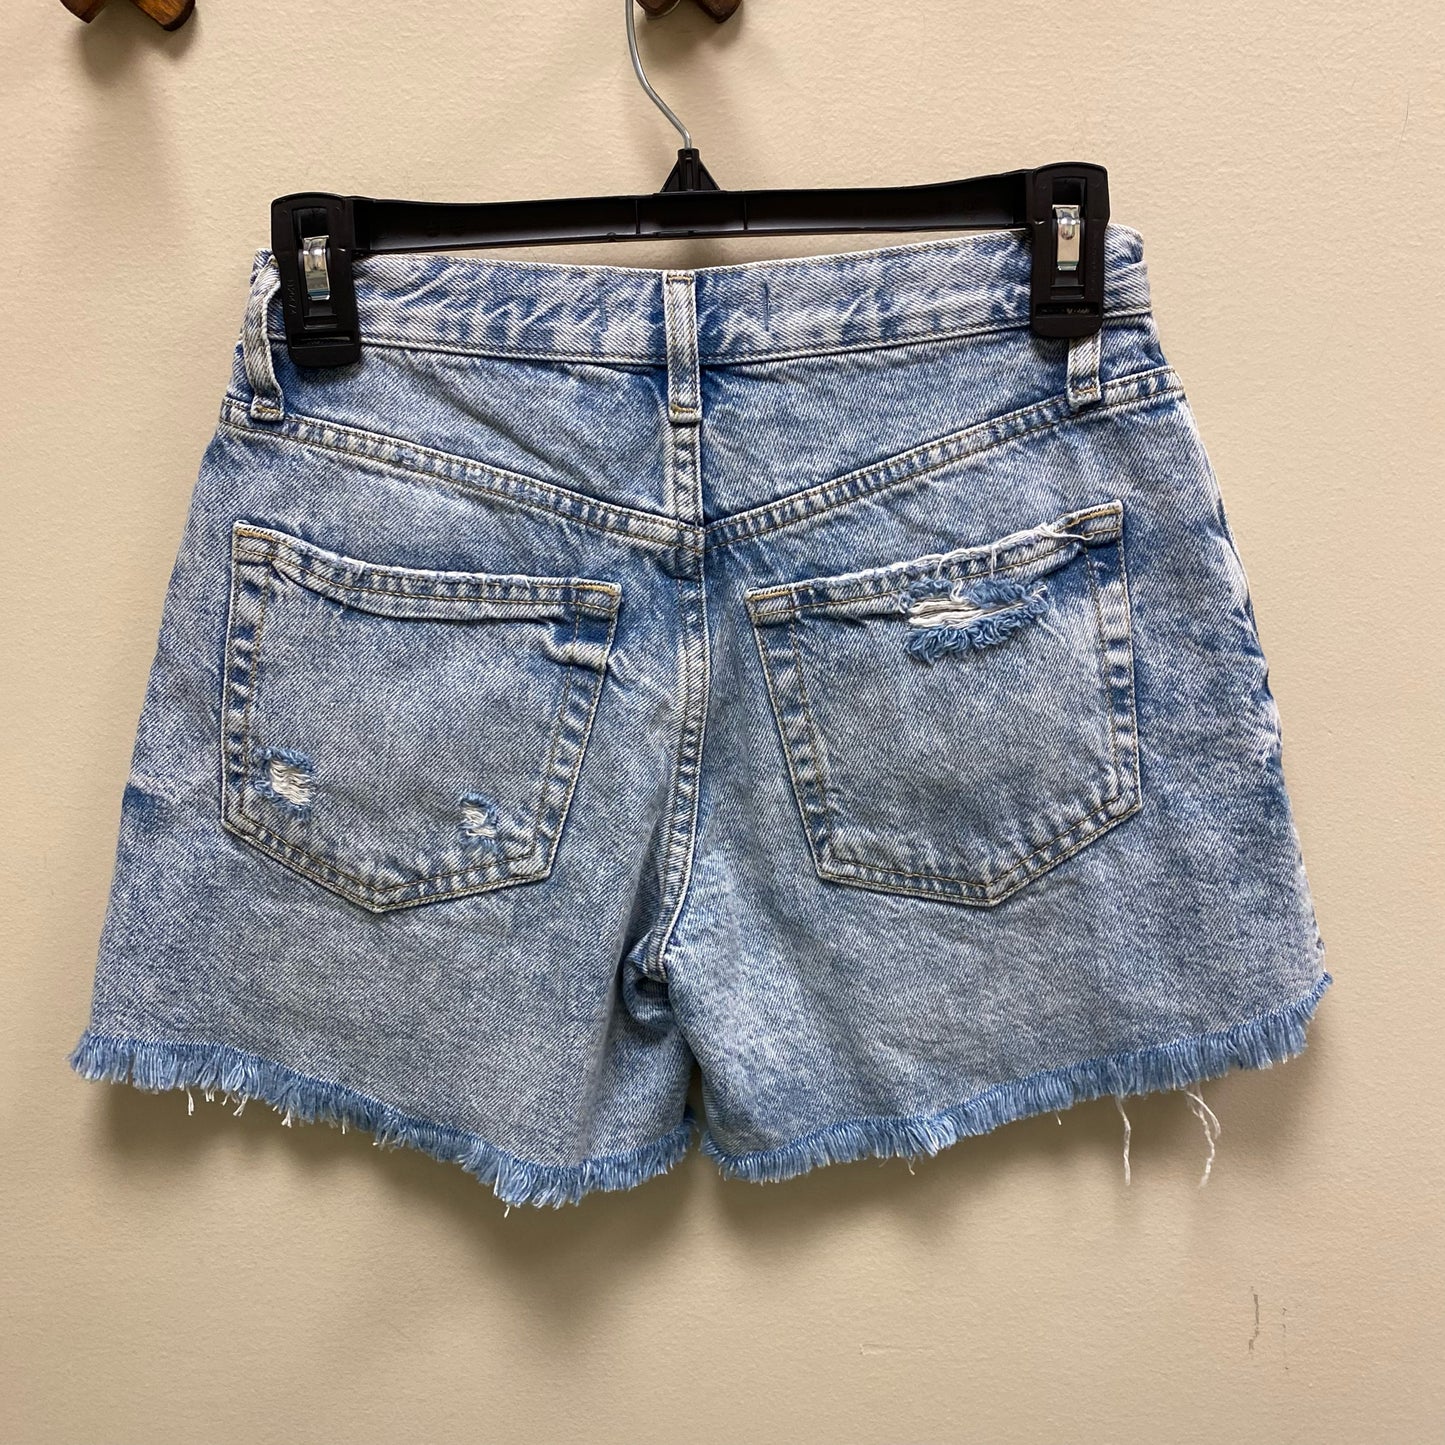 FREE PEOPLE We The Free - Maggie Light Stone Distressed Denim Shorts - Size 24